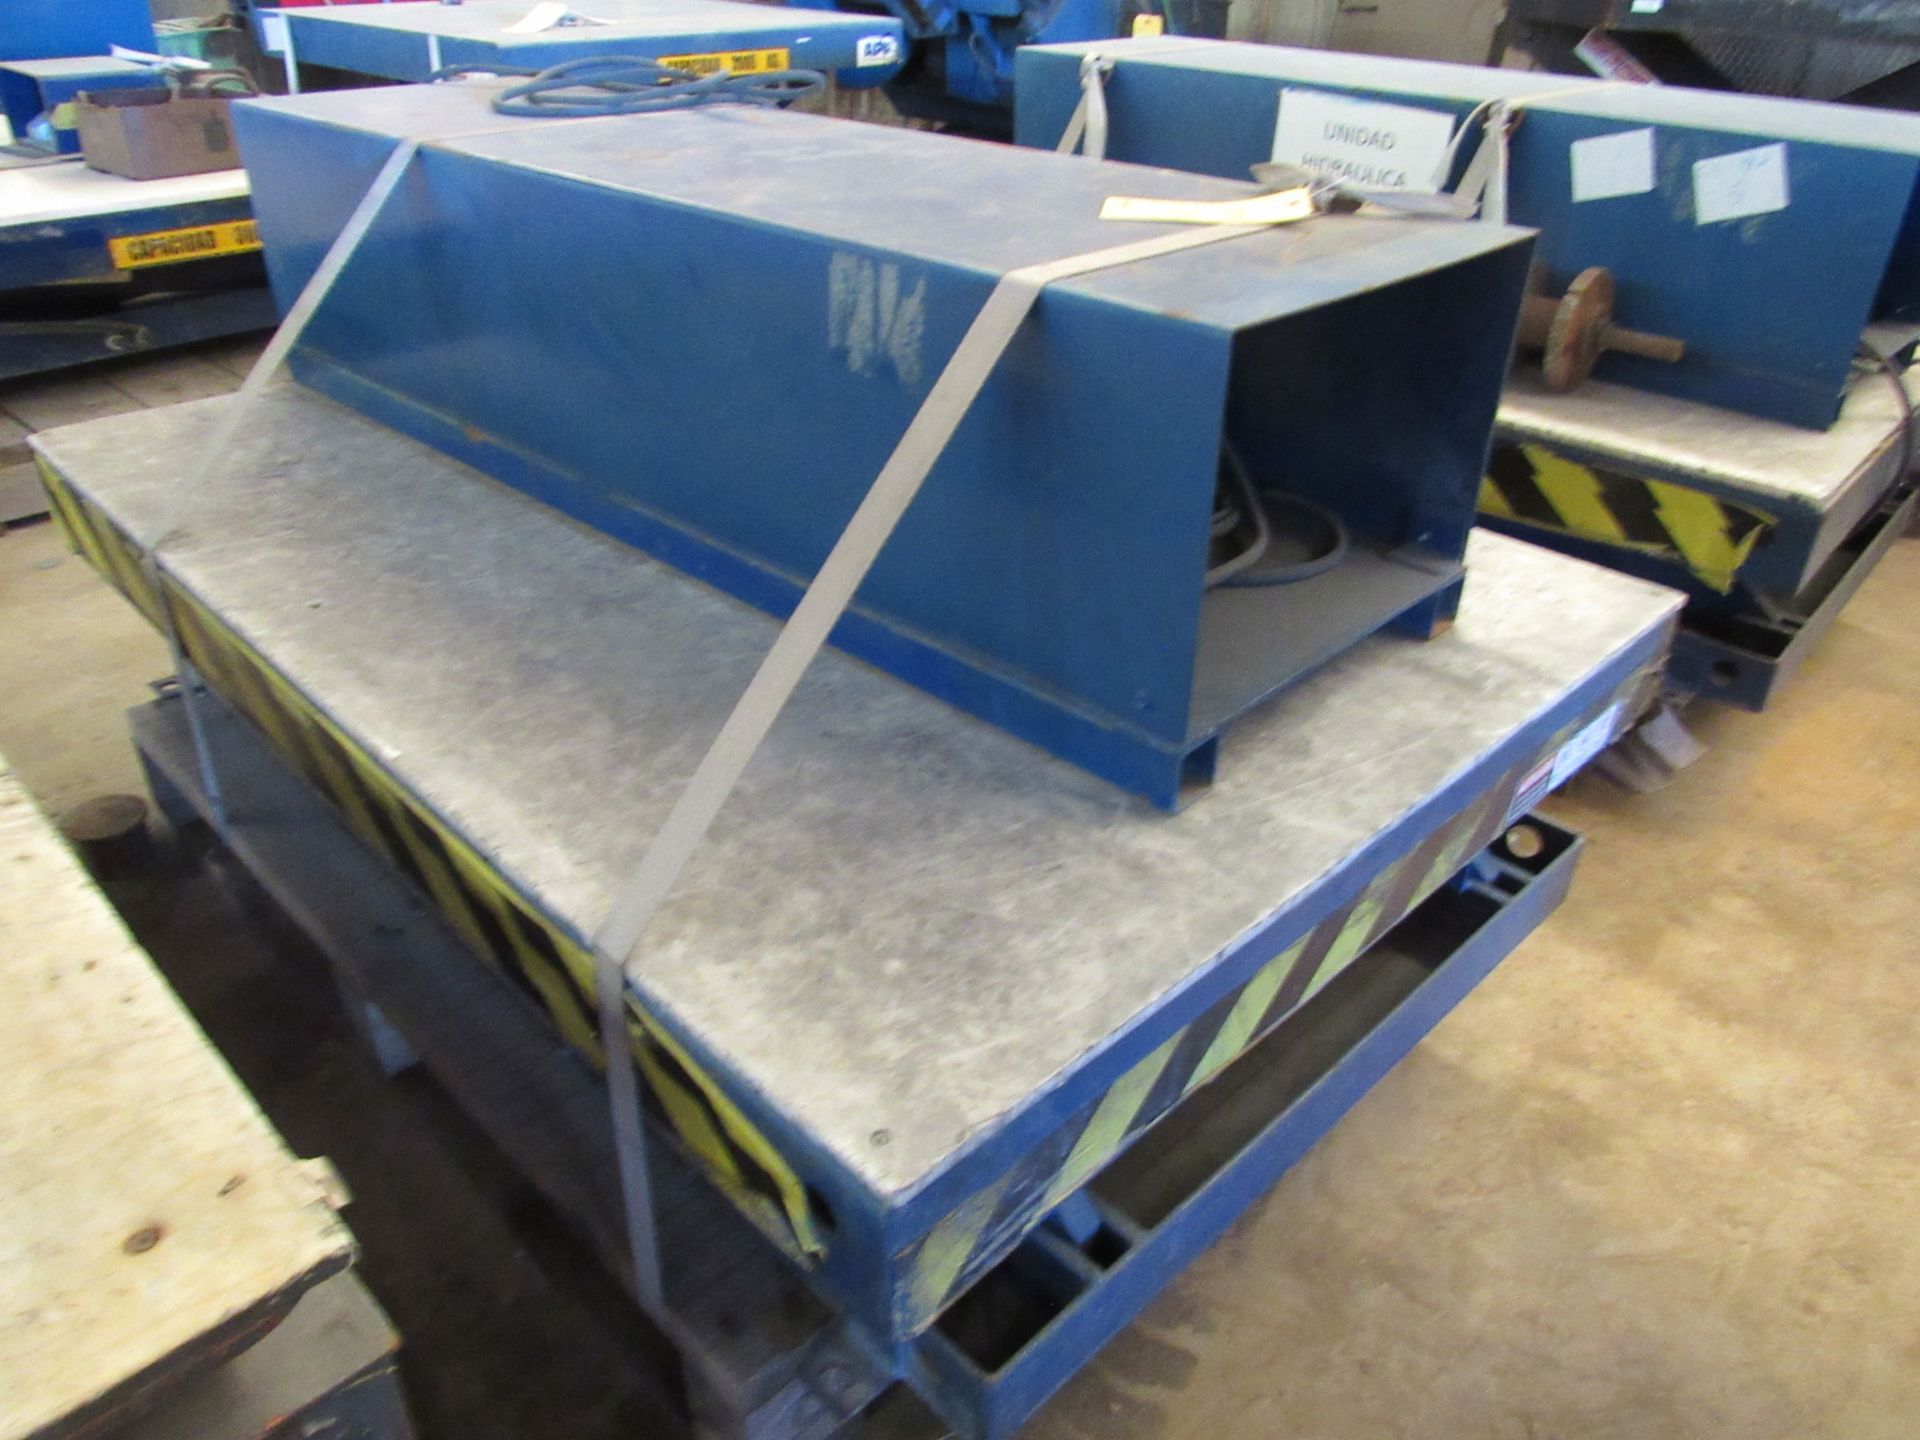 APF Product Model-TS-3000-120 Hydraulic Lift Table with Hydraulic Foot Controls - Image 3 of 3